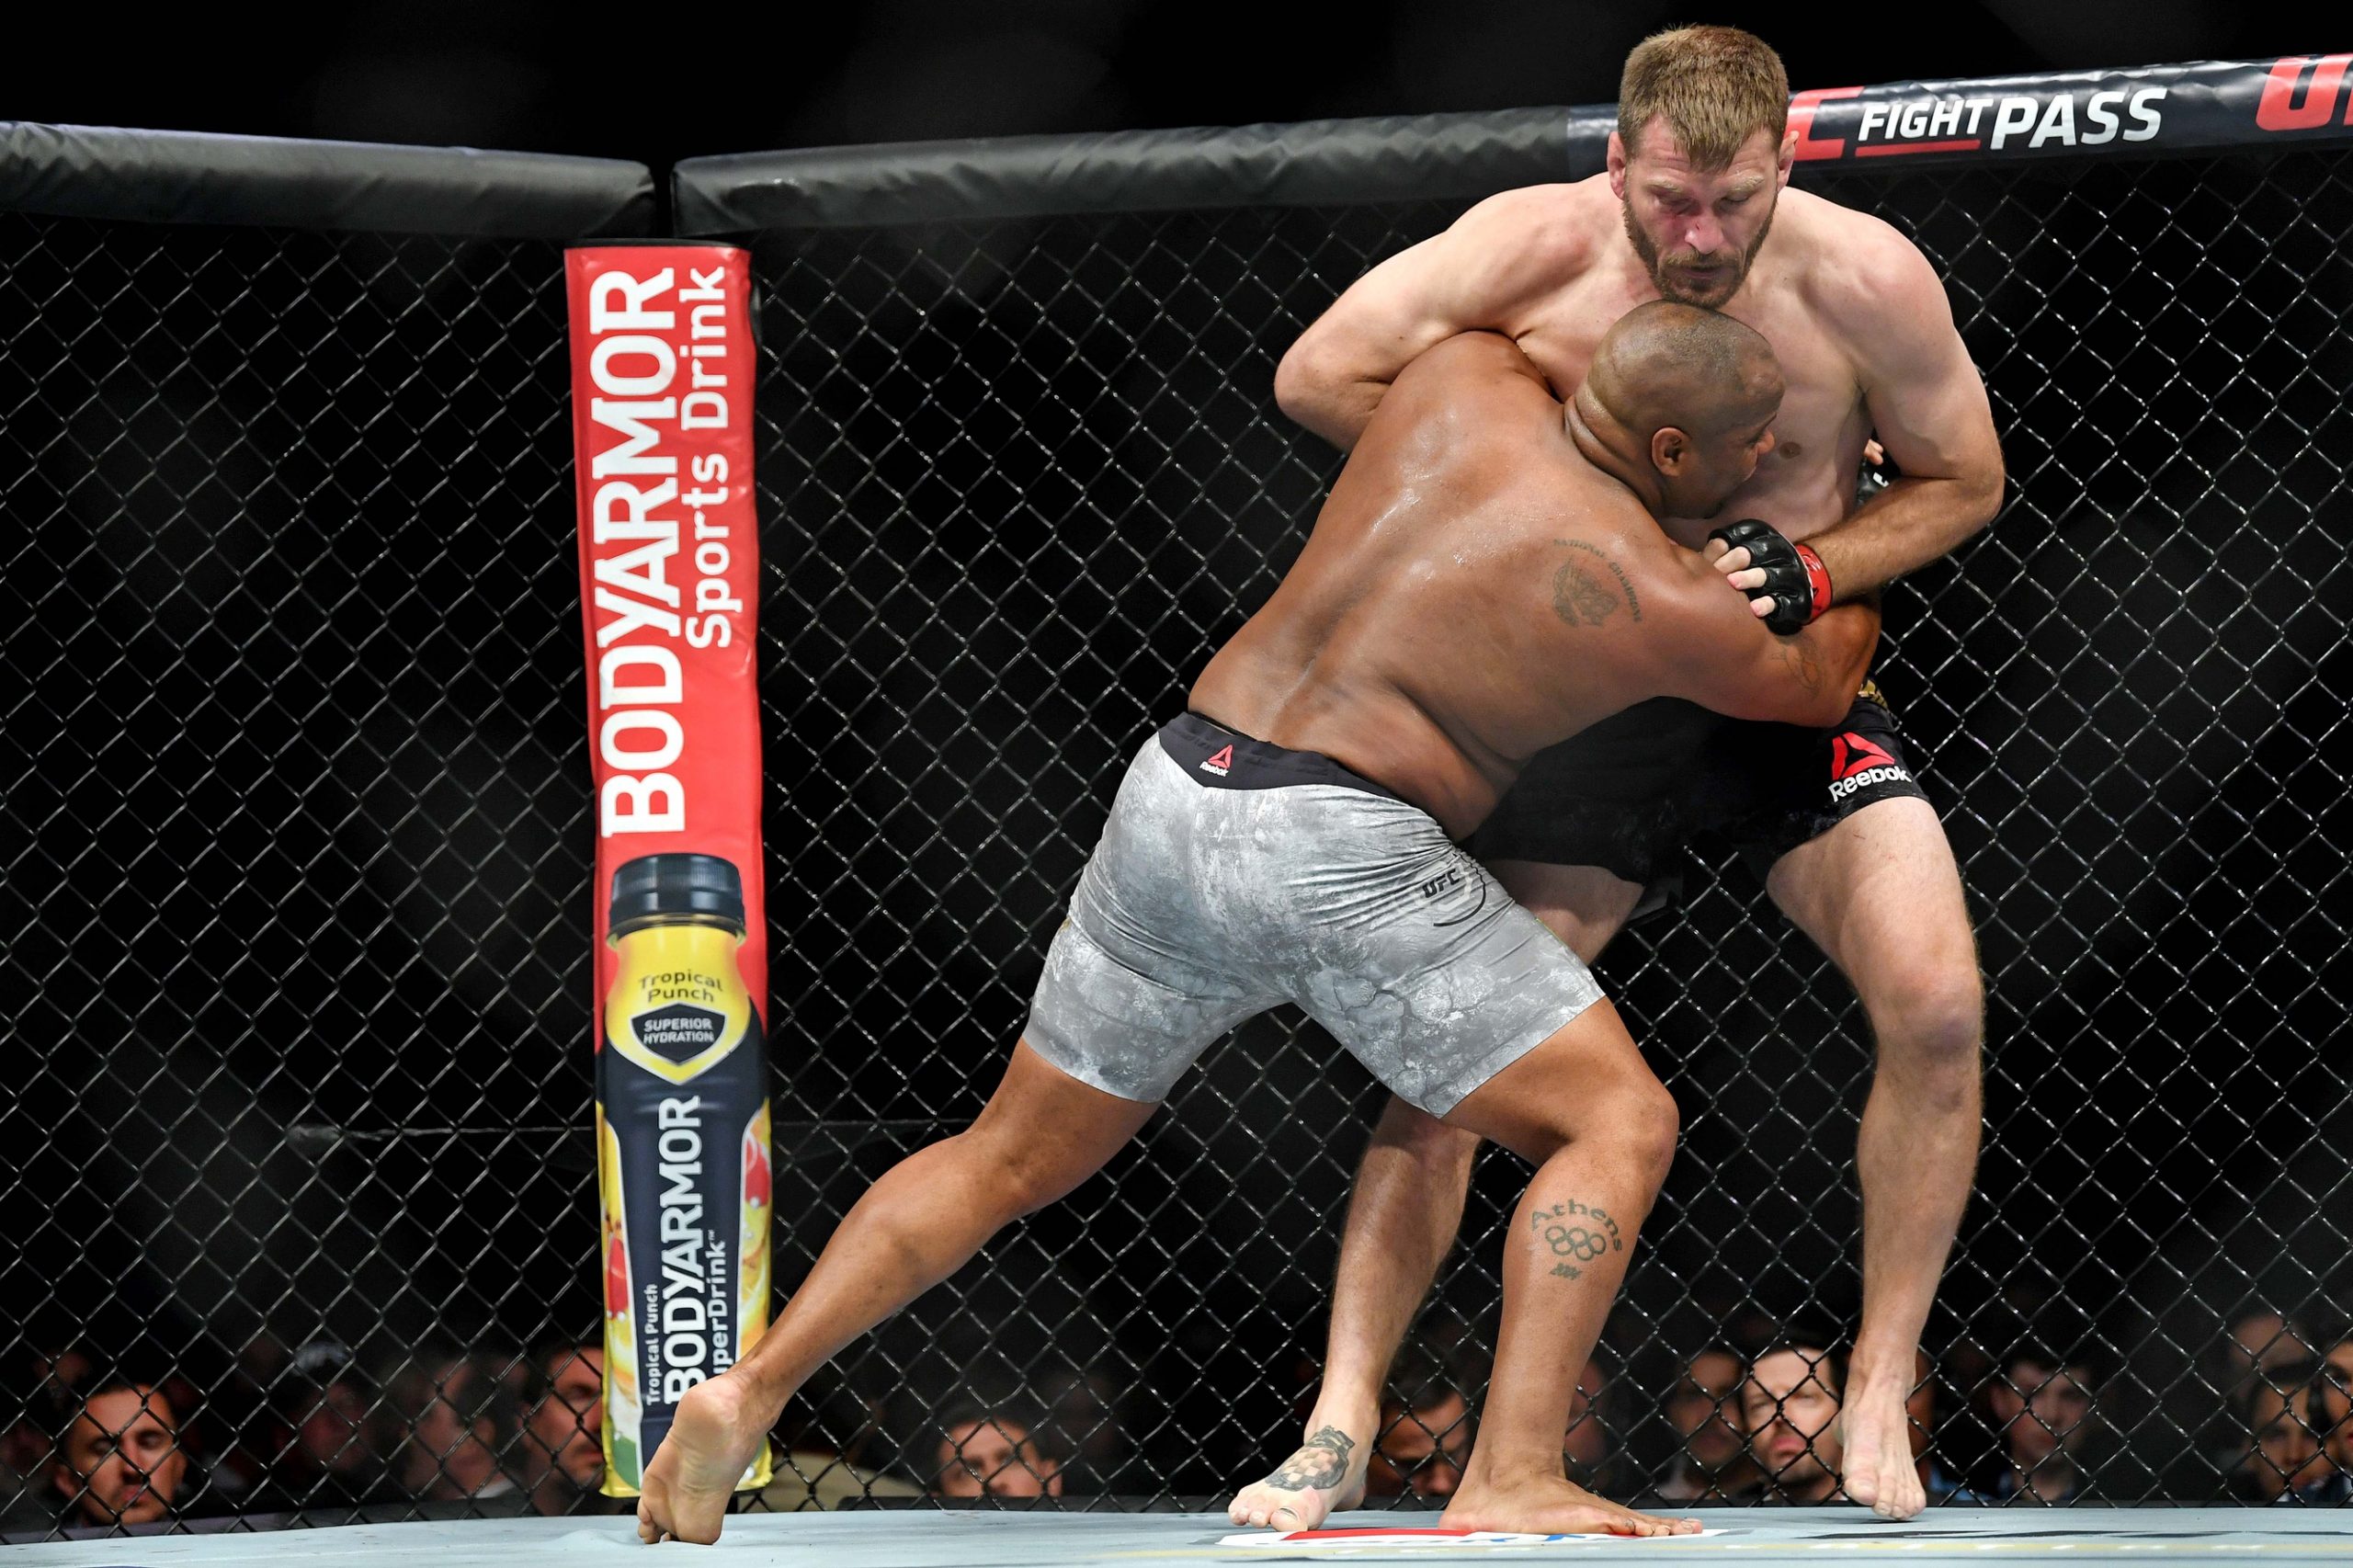 daniel cormier clinches with stipe miocic